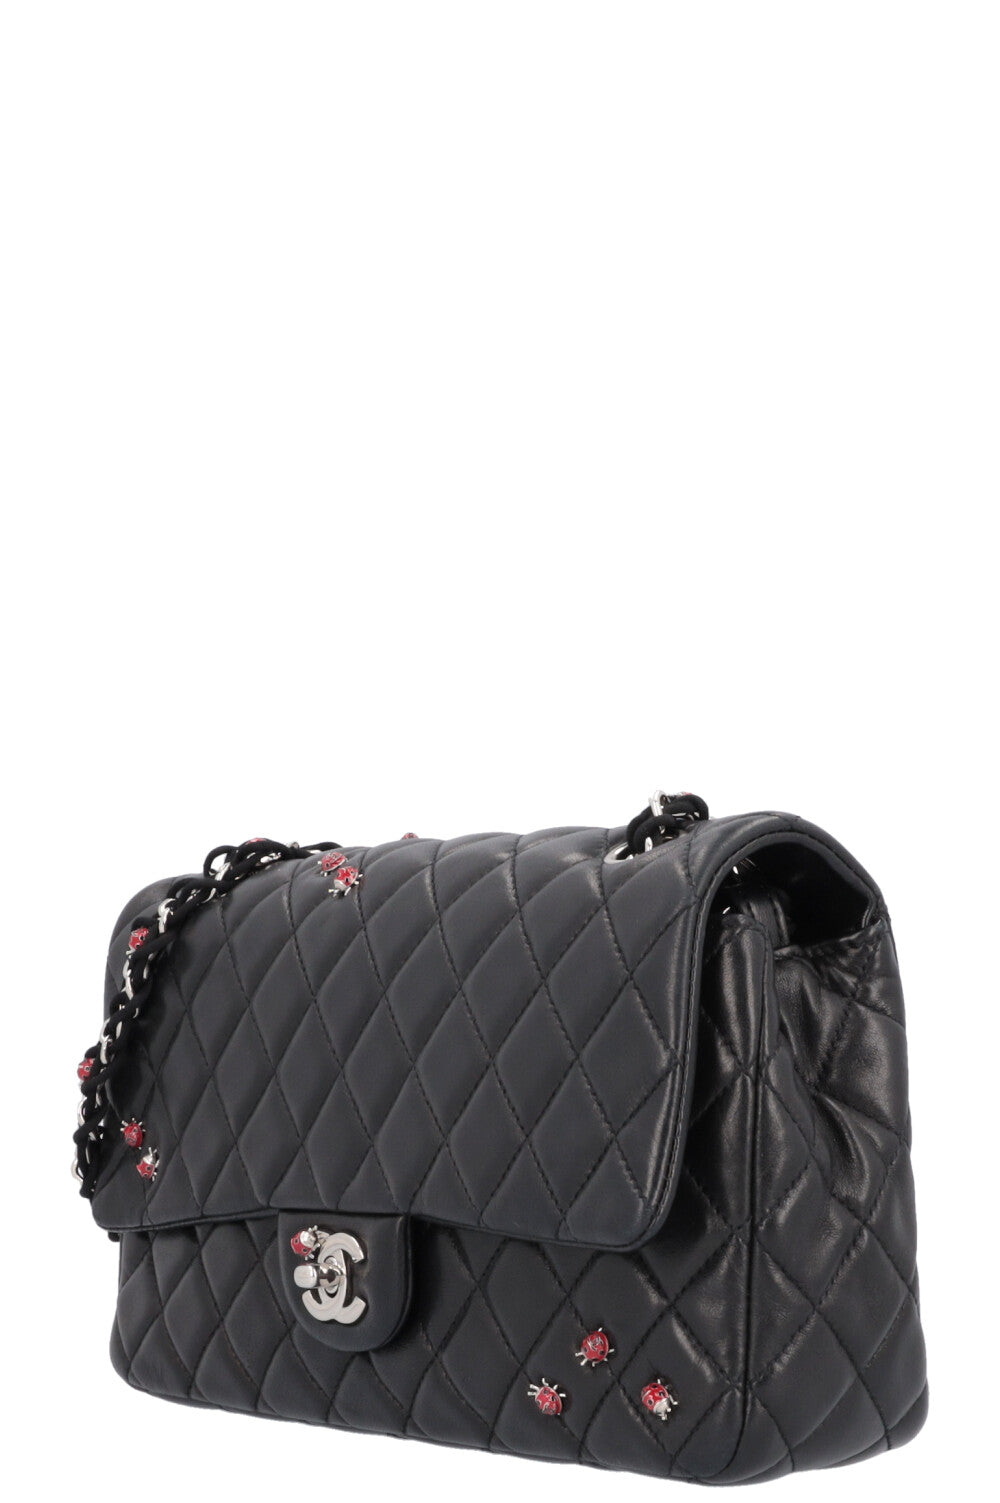 Chanel Black Quilted Lambskin Vintage Medium Classic Single Flap Bag w